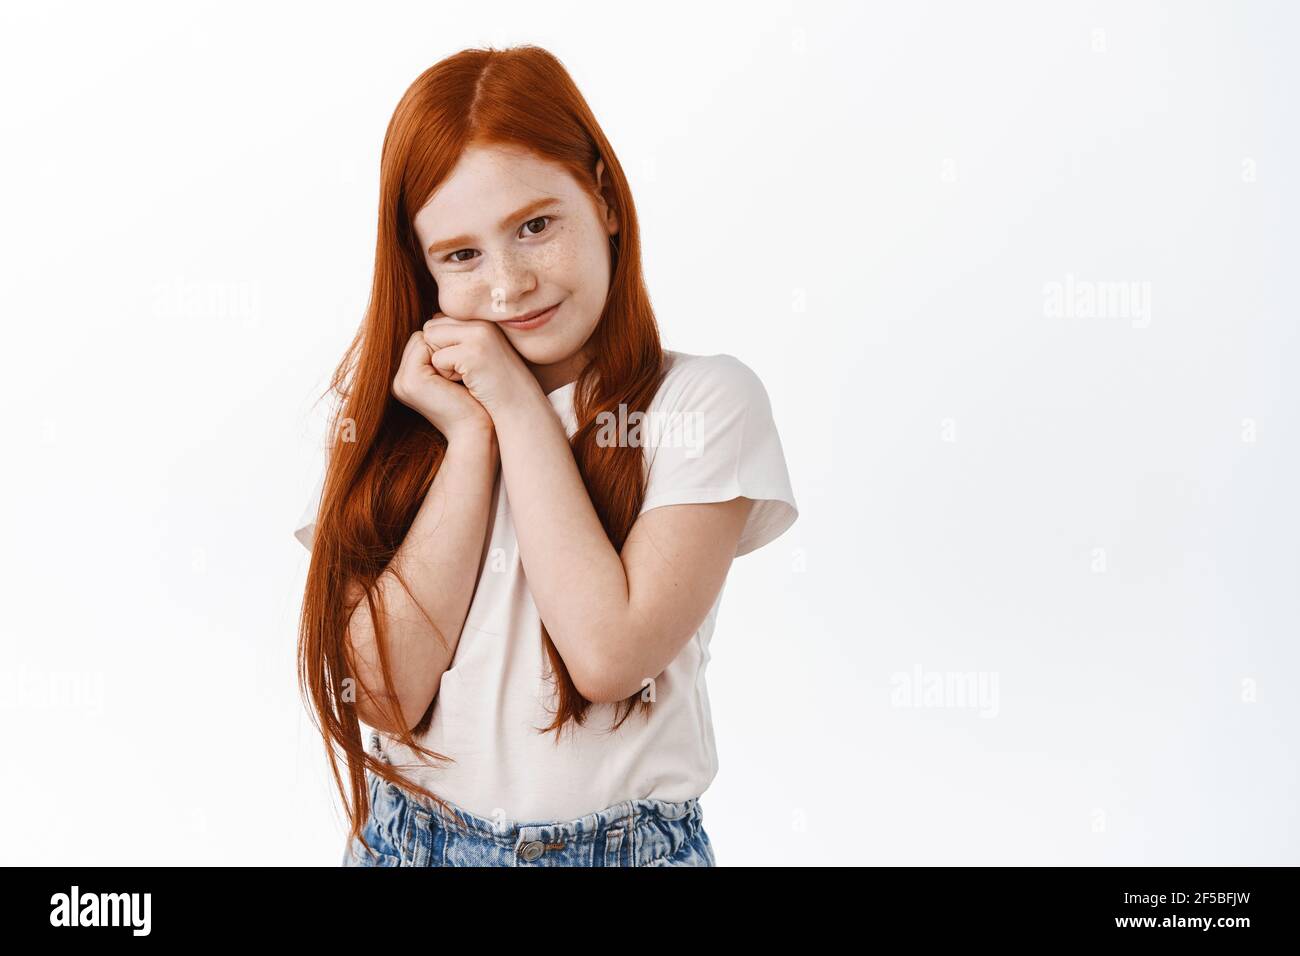 Lovely little redhead girl with freckles and long ginger hair, looking  adorable and cute at camera, holding hands near face in silly pose,  daydreaming Stock Photo - Alamy